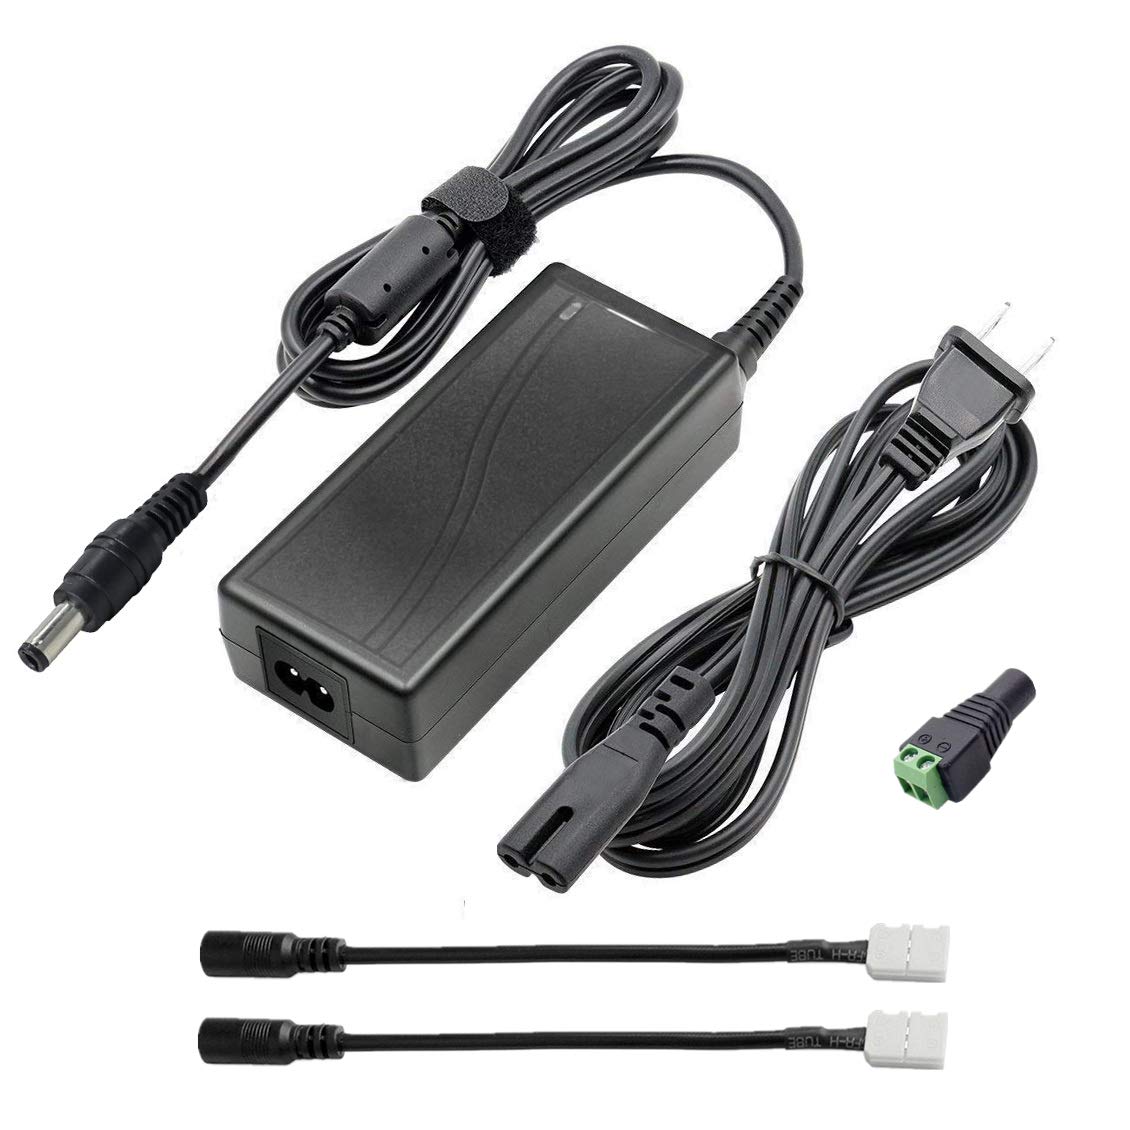 Chanzon 12V 5A LED Strip Power Supply 60W AC DC Adapter UL Listed